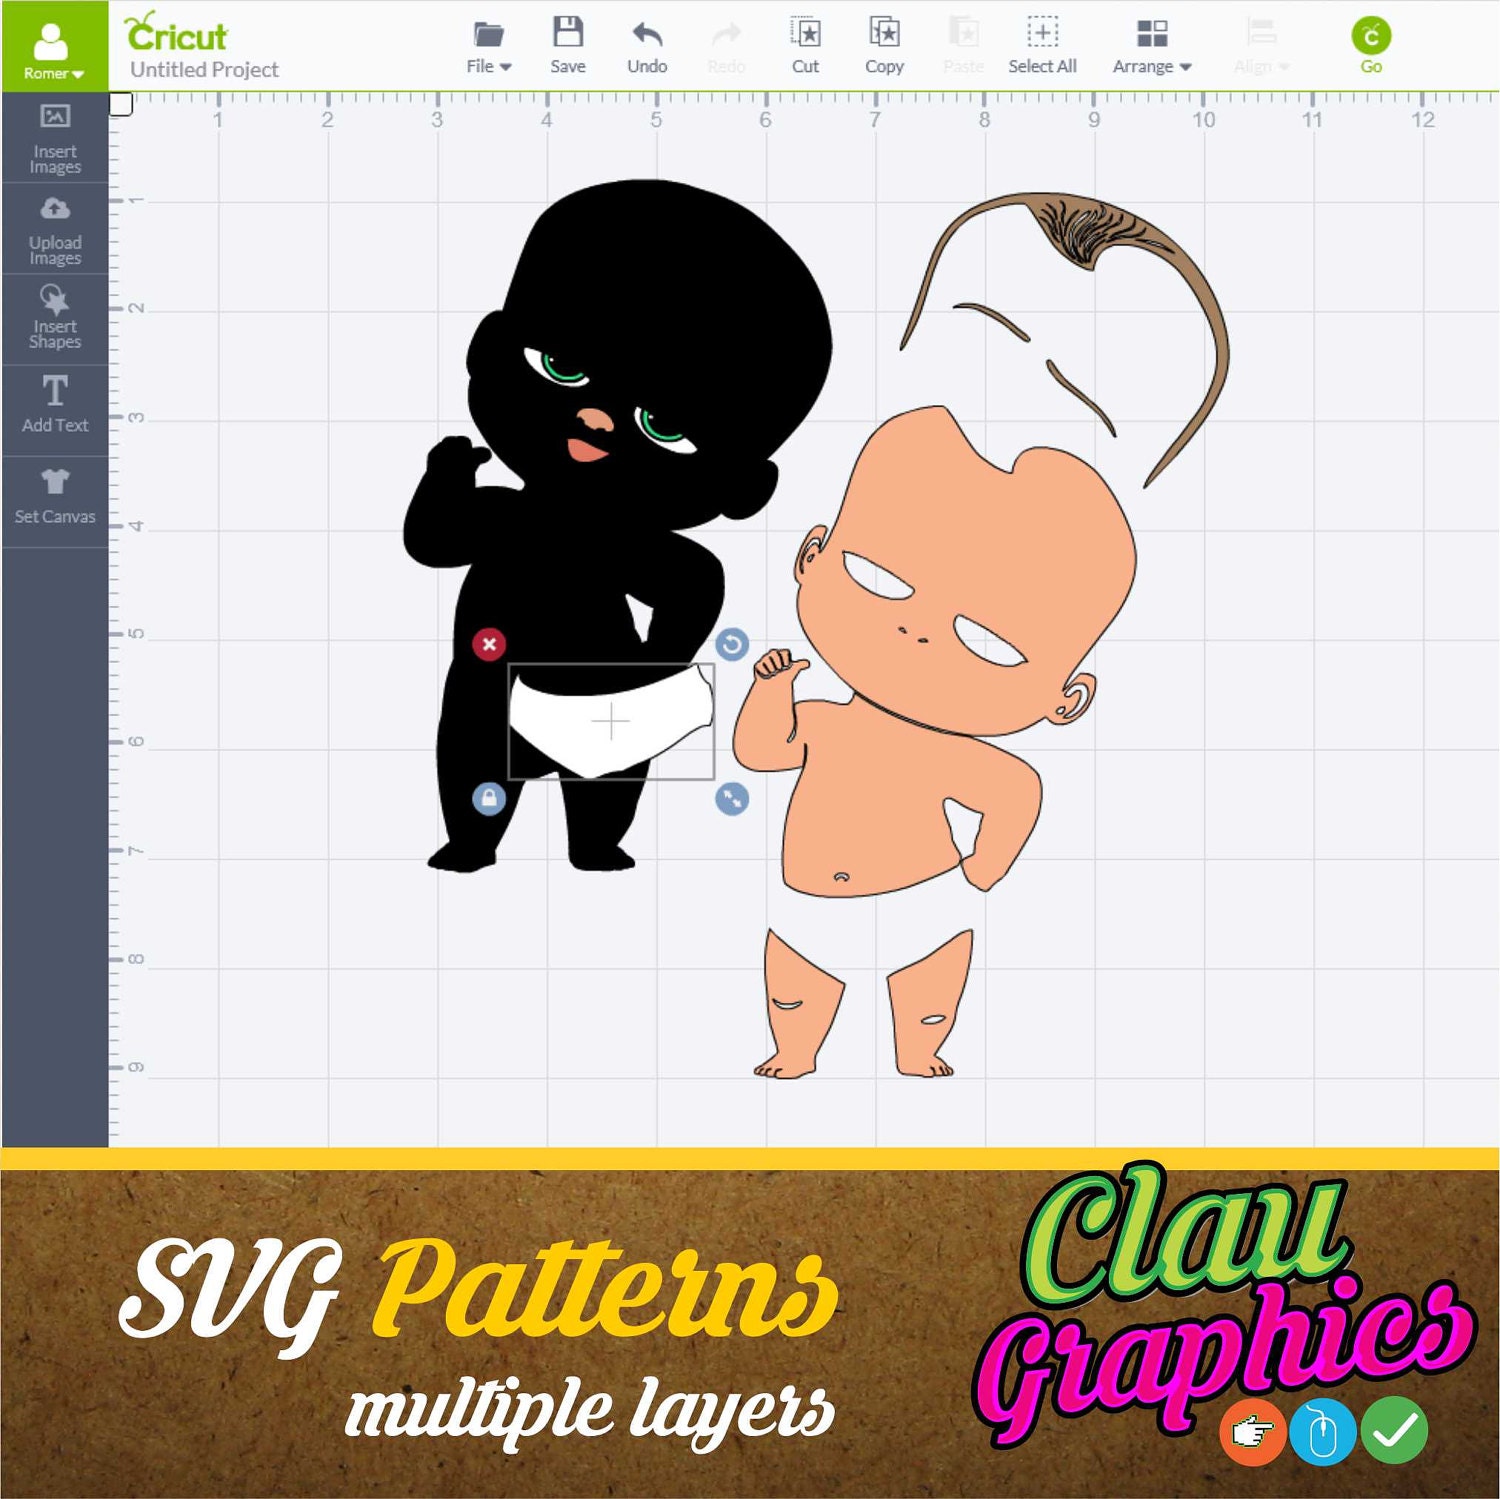 Download The Boss Baby Movie clipart Digital Illustrations on editable